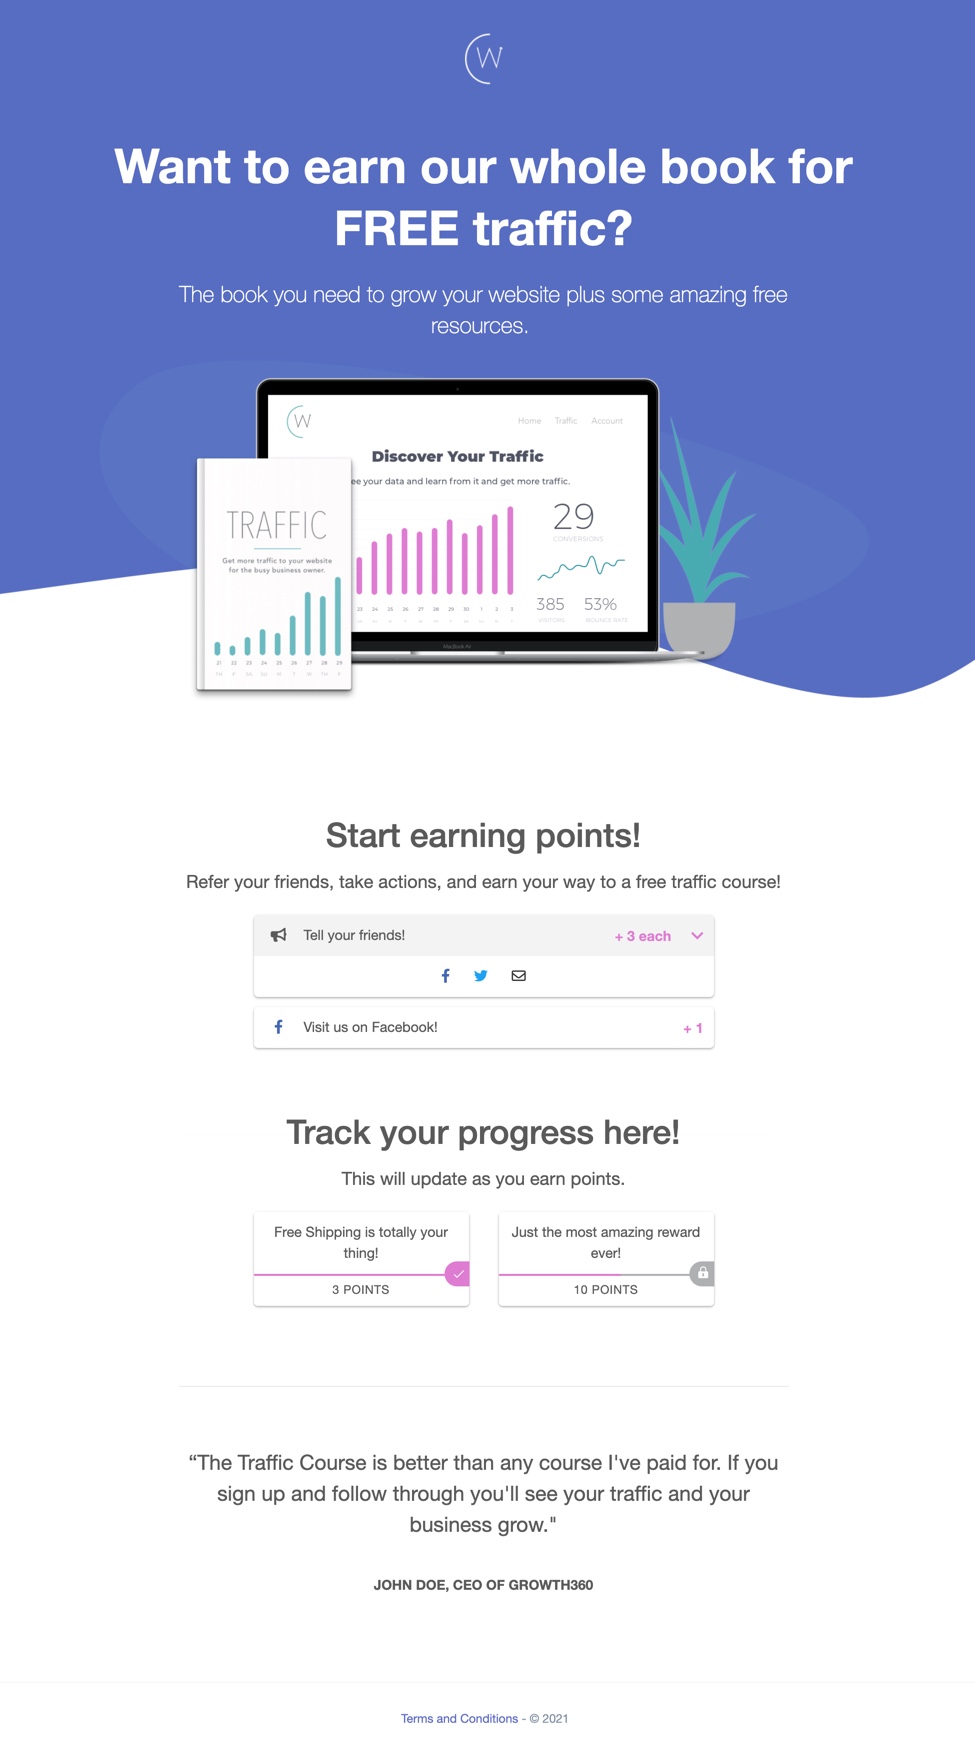 track your points progress to unlock rewards and win